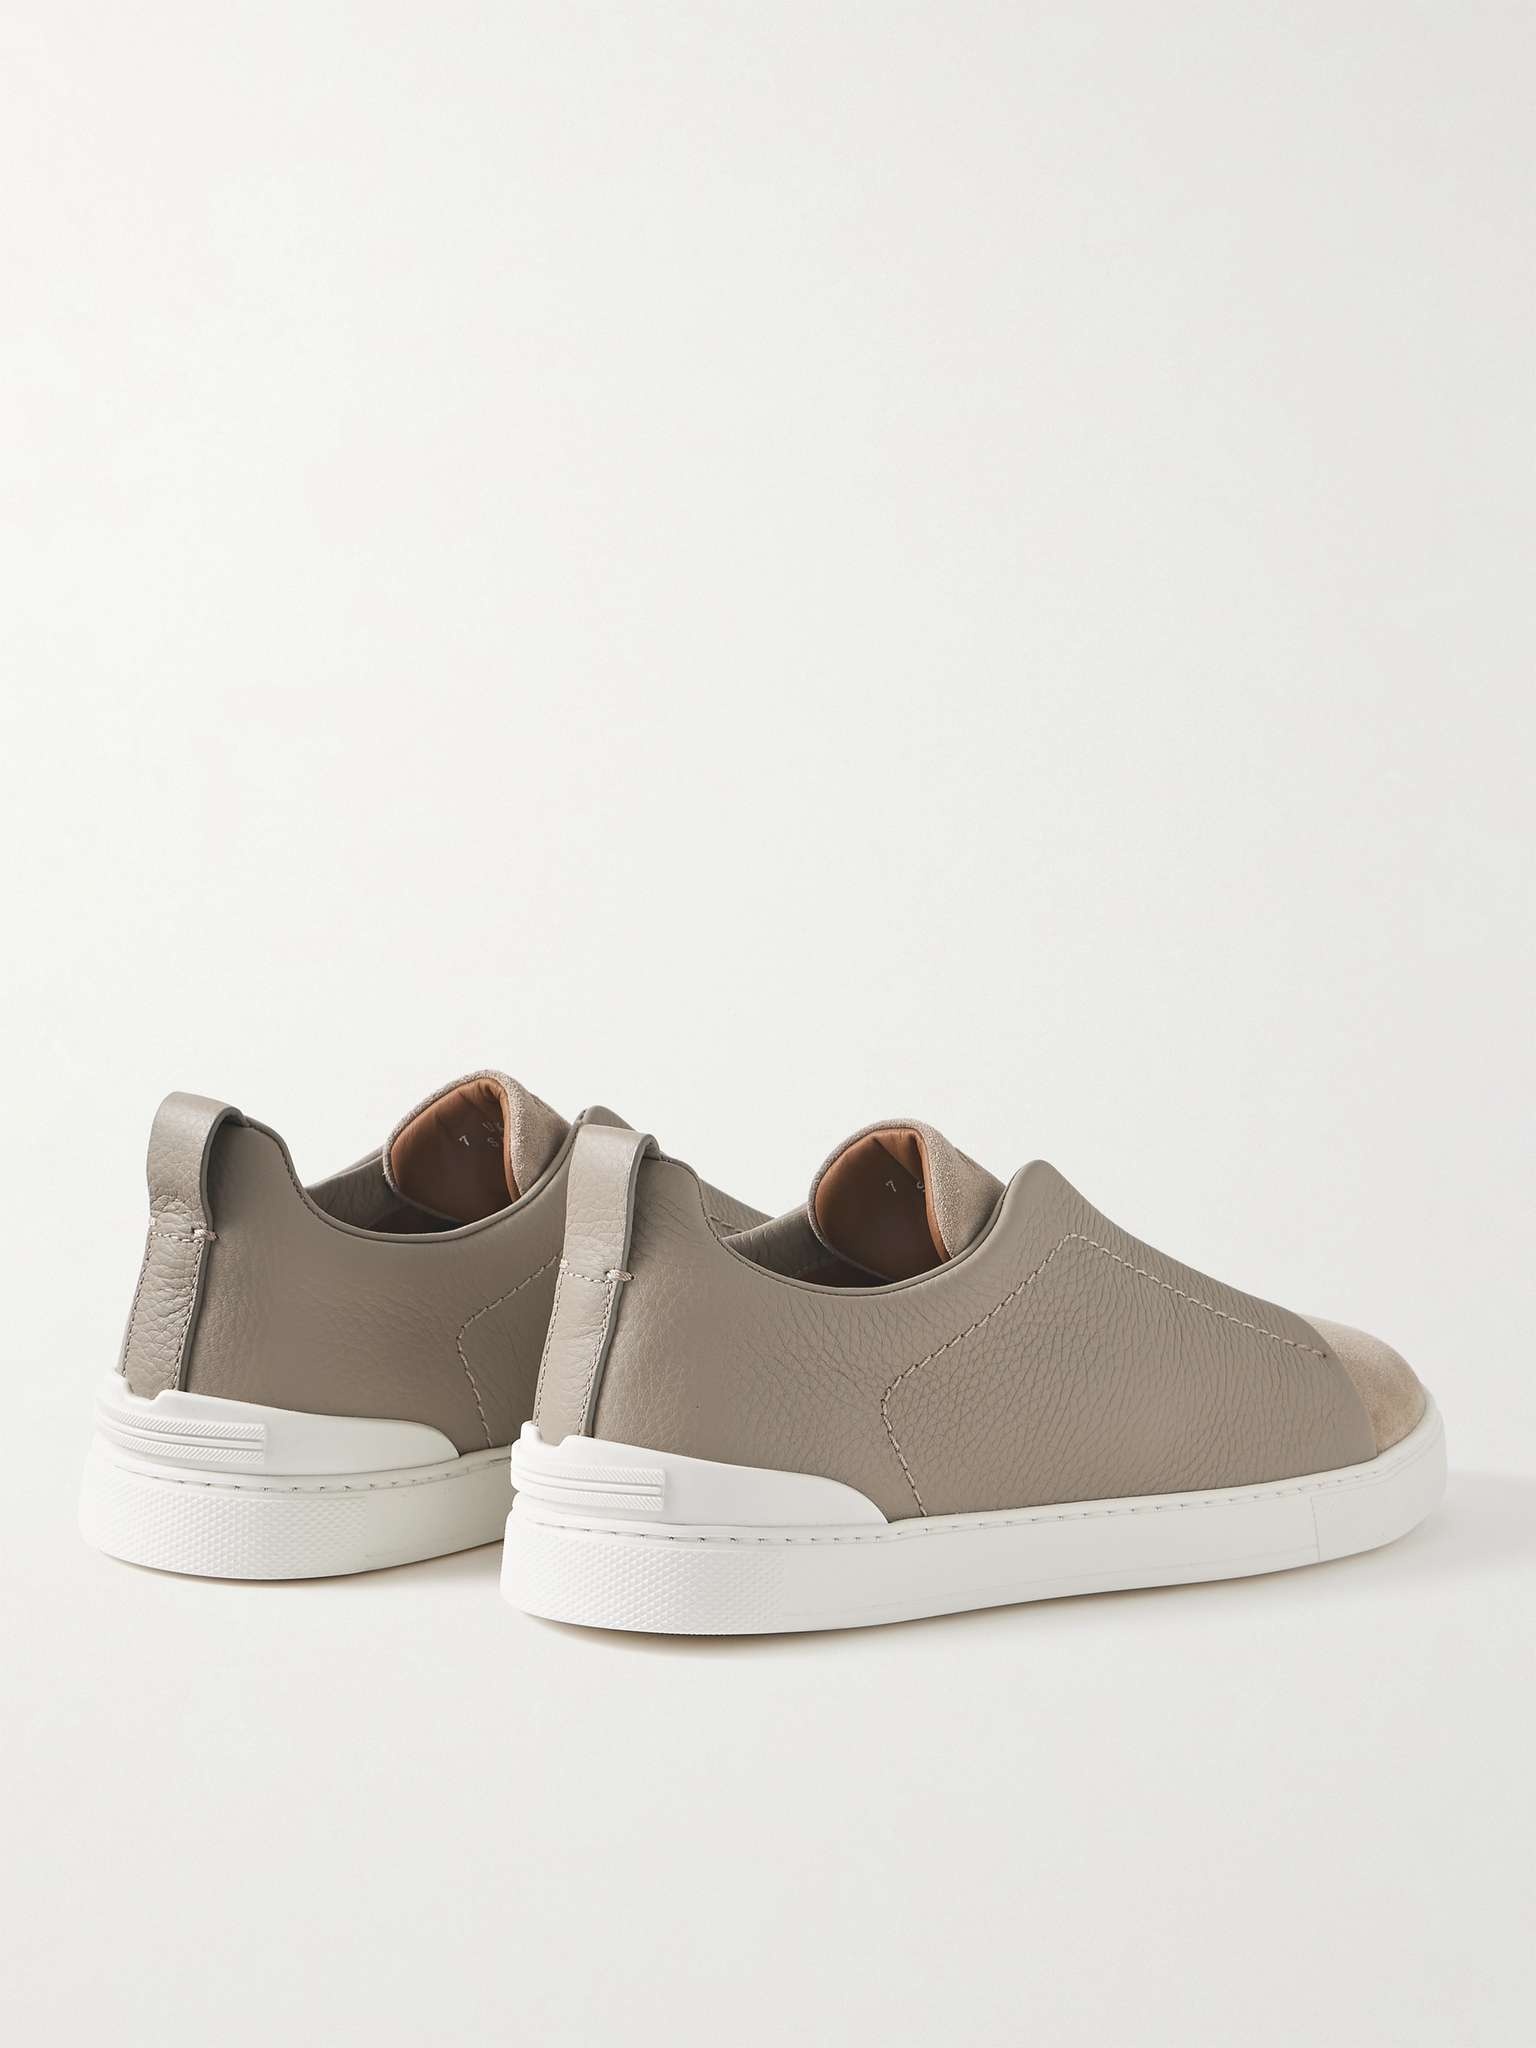 Triple Stitch Full-Grain Leather and Suede Sneakers - 5